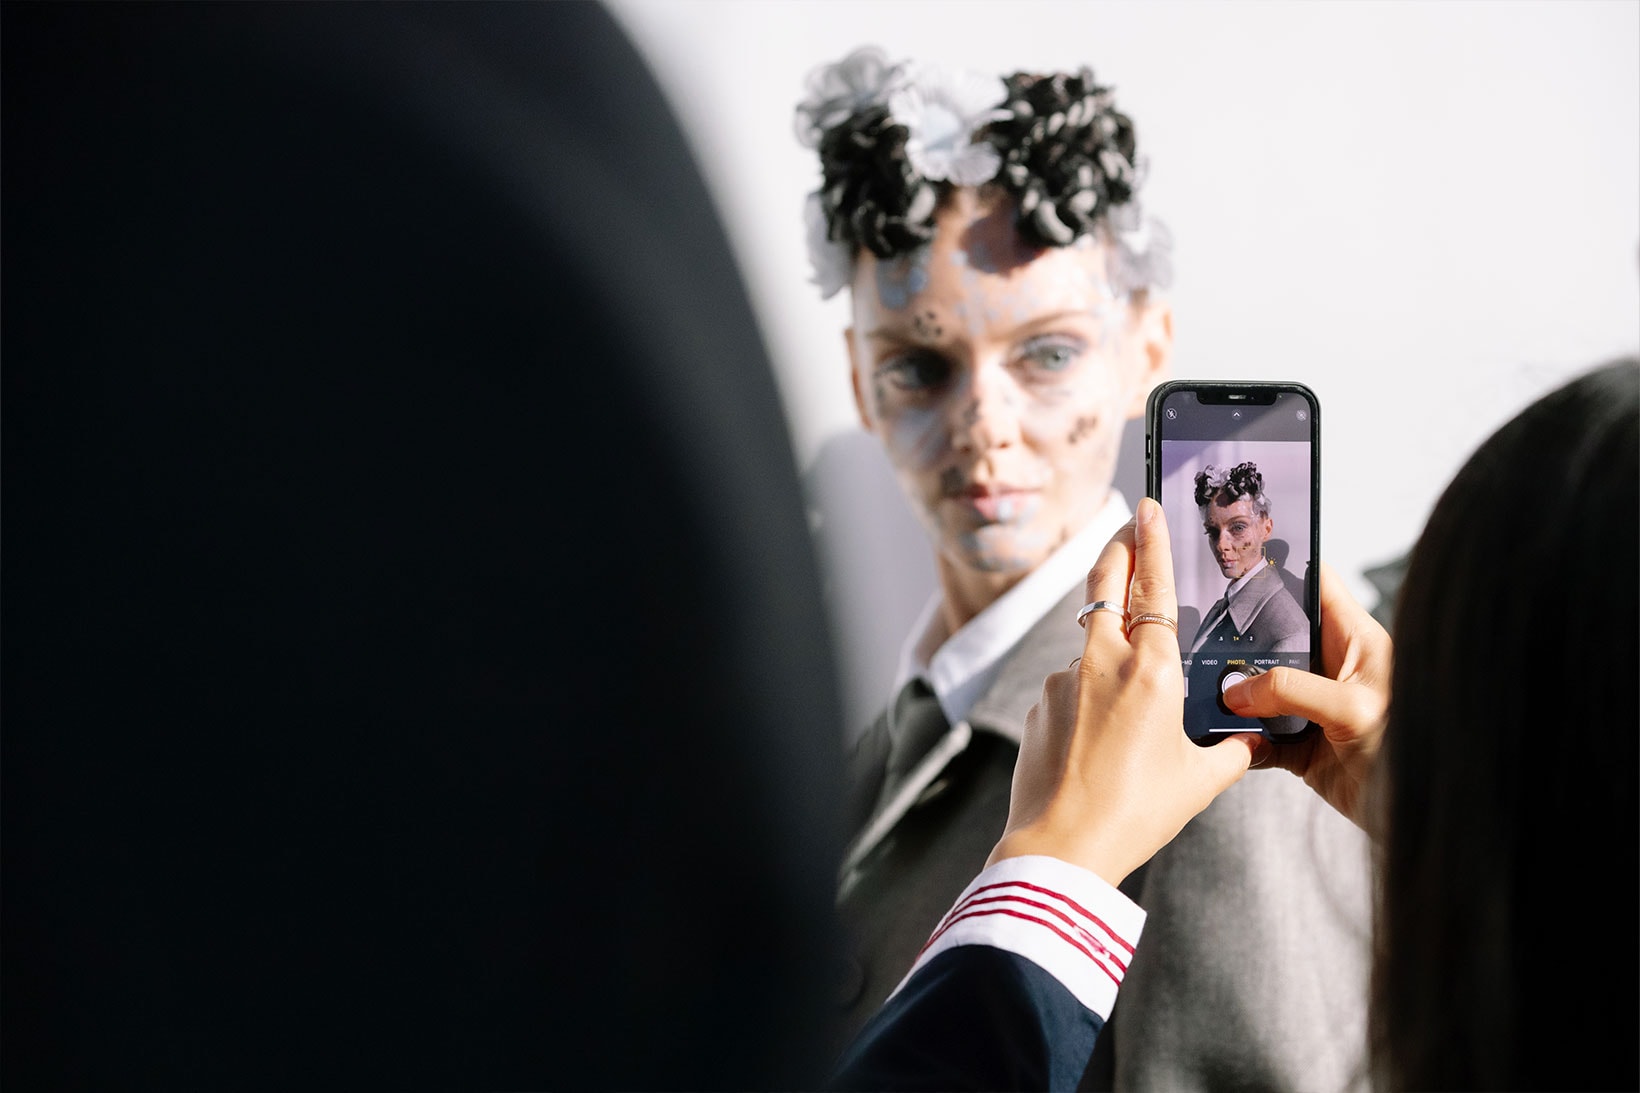 Thom Browne NYFW Spring/Summer 2022 SS22 Backstage iPhone Photos